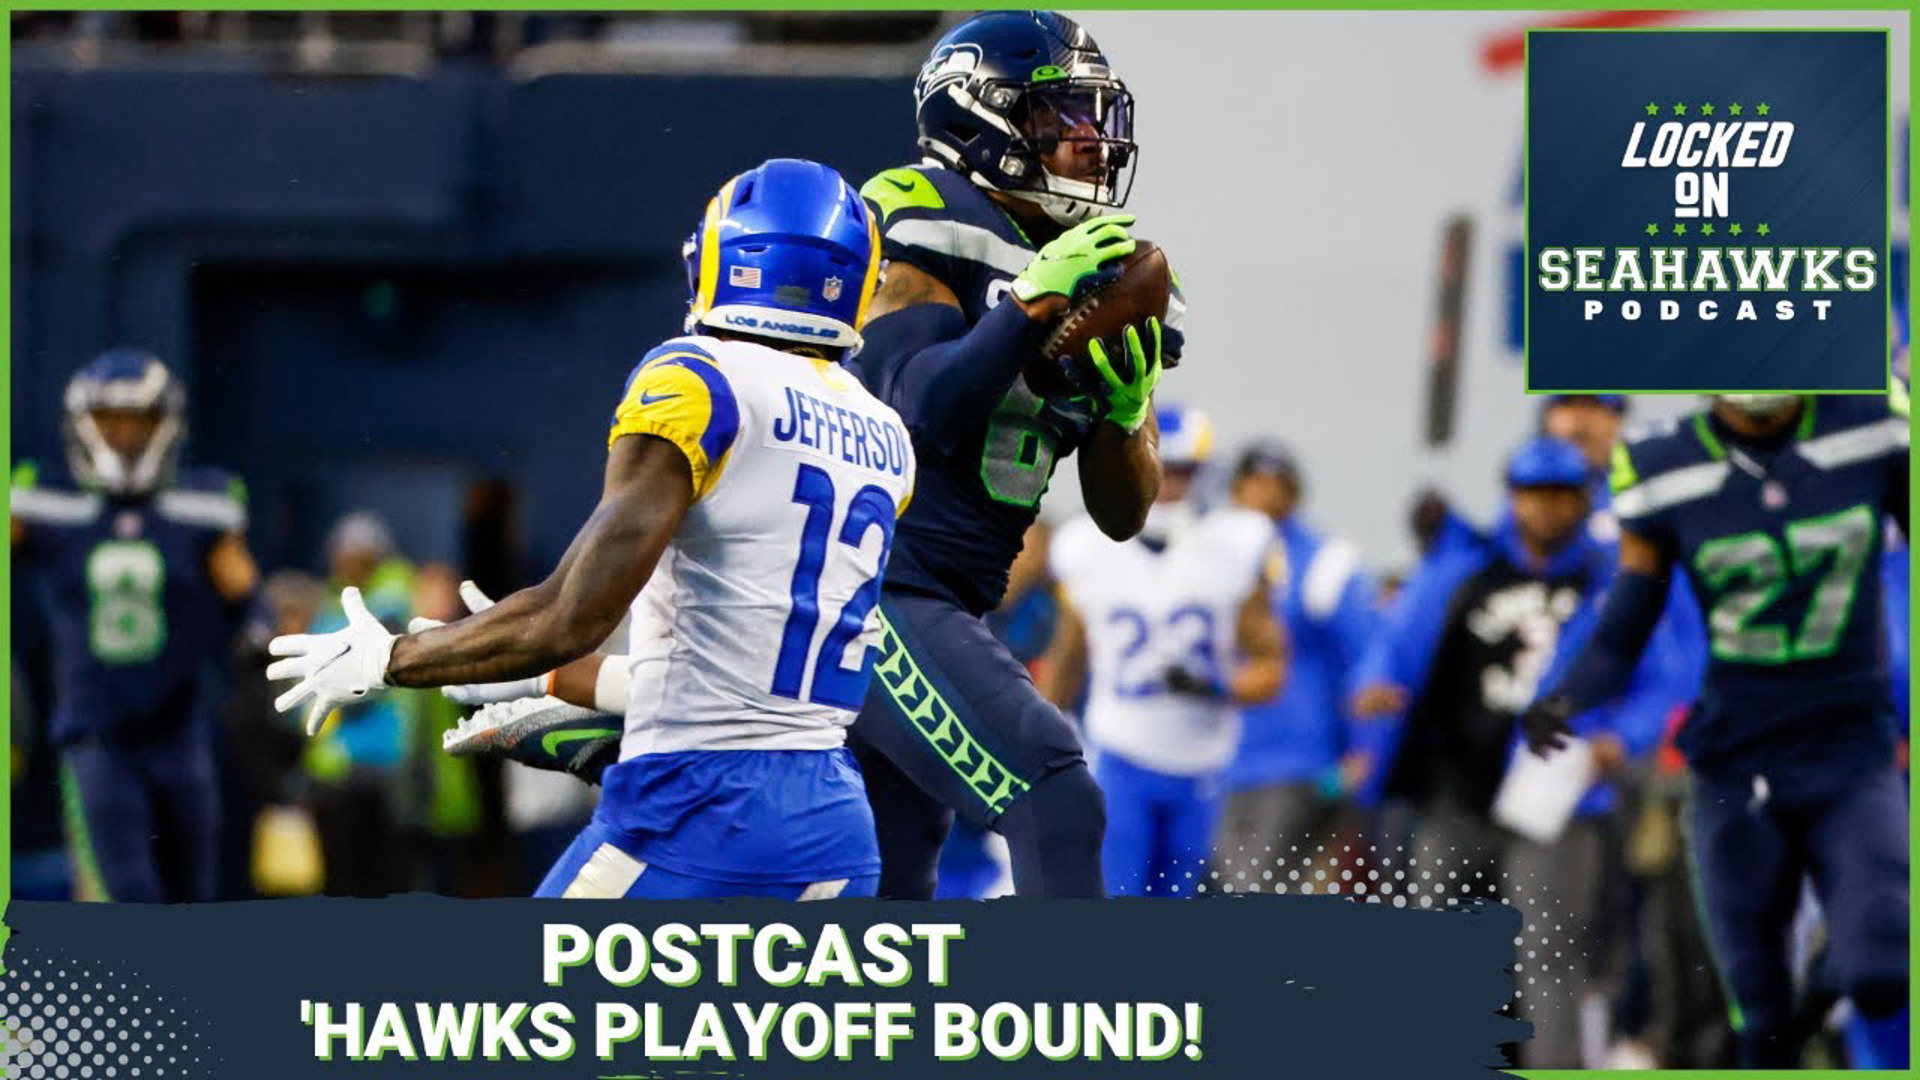 With a spot in the playoffs remaining within reach, host Corbin Smith details what went down at Lumen Field in the Seahawks must-win season finale against the Rams.